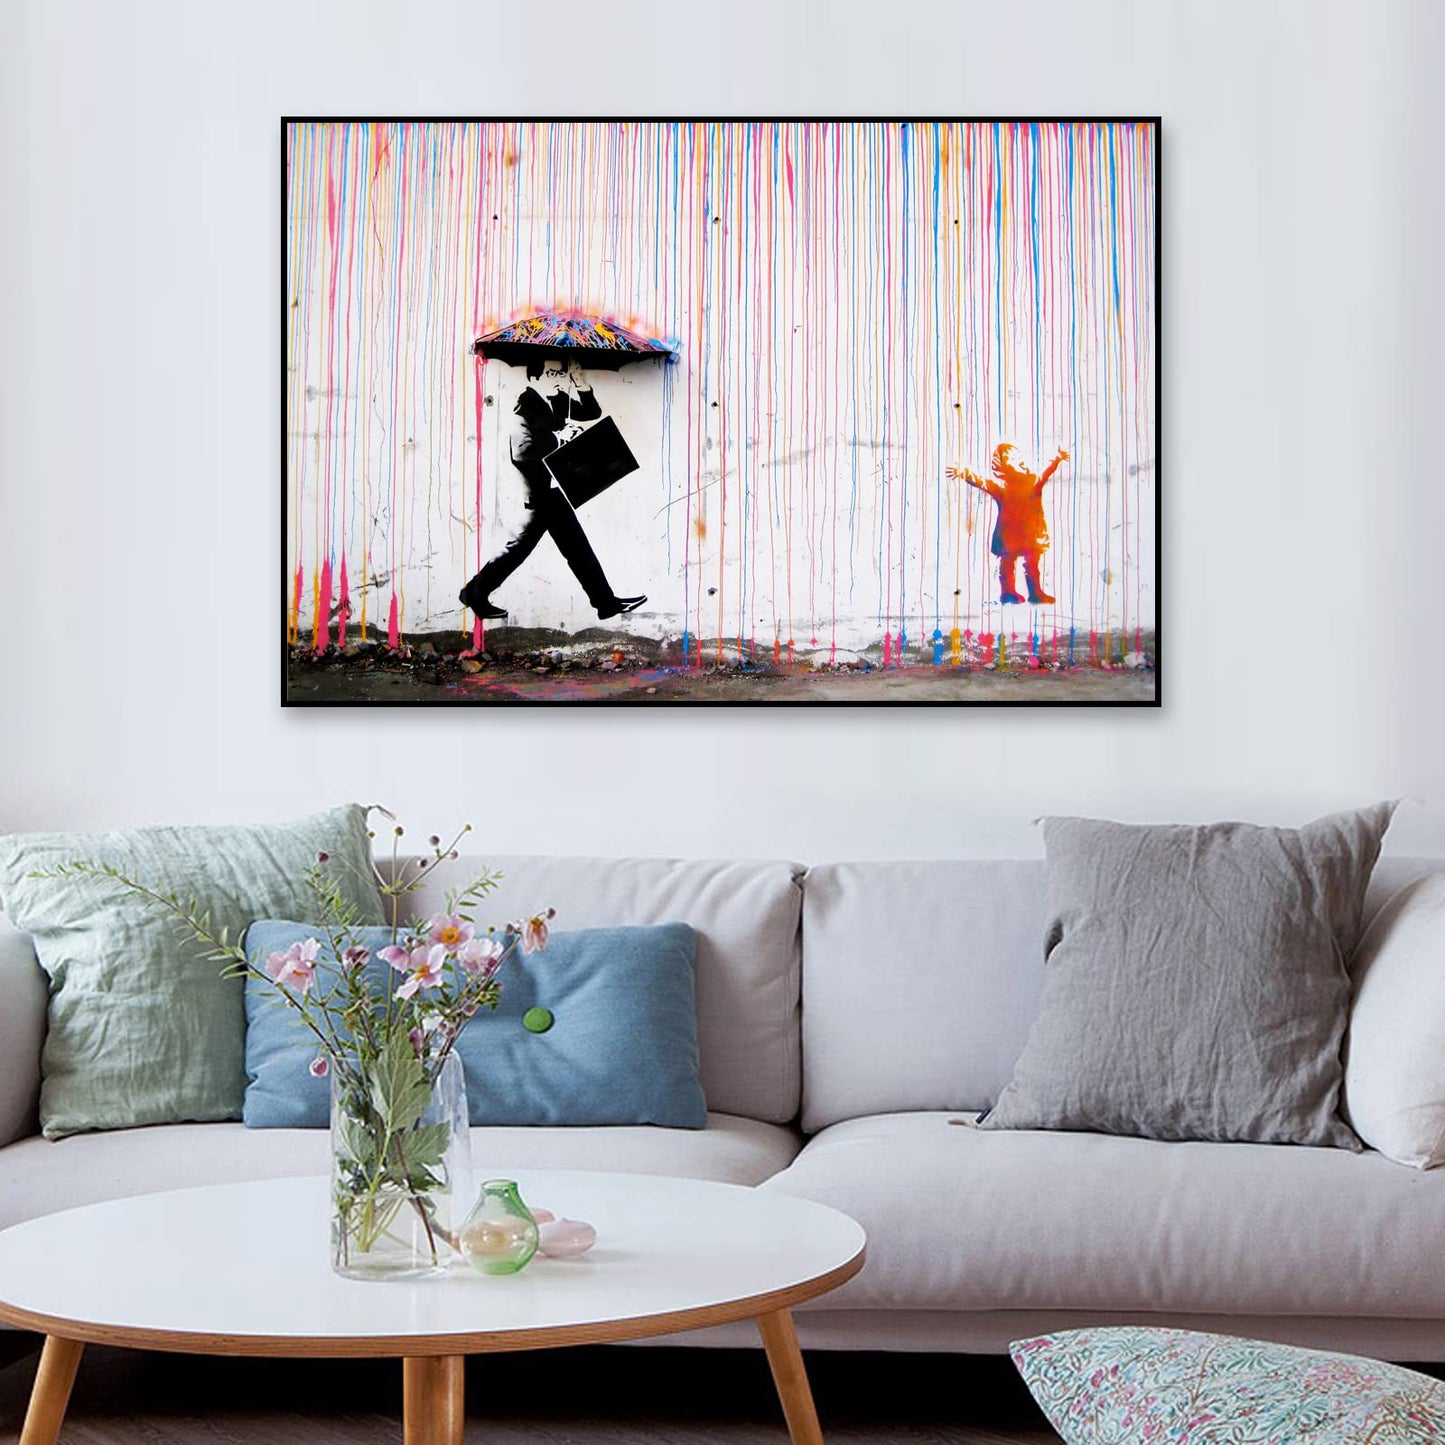 ZZPT Graffiti Wall Art Poster - Banksy Colorful Rain Canvas Art Print - Banksy Poster - Street Art Painting Modern Artwork Abstract Wall Decor for Living Room Bedroom Unframed (12x18in/30x45cm)